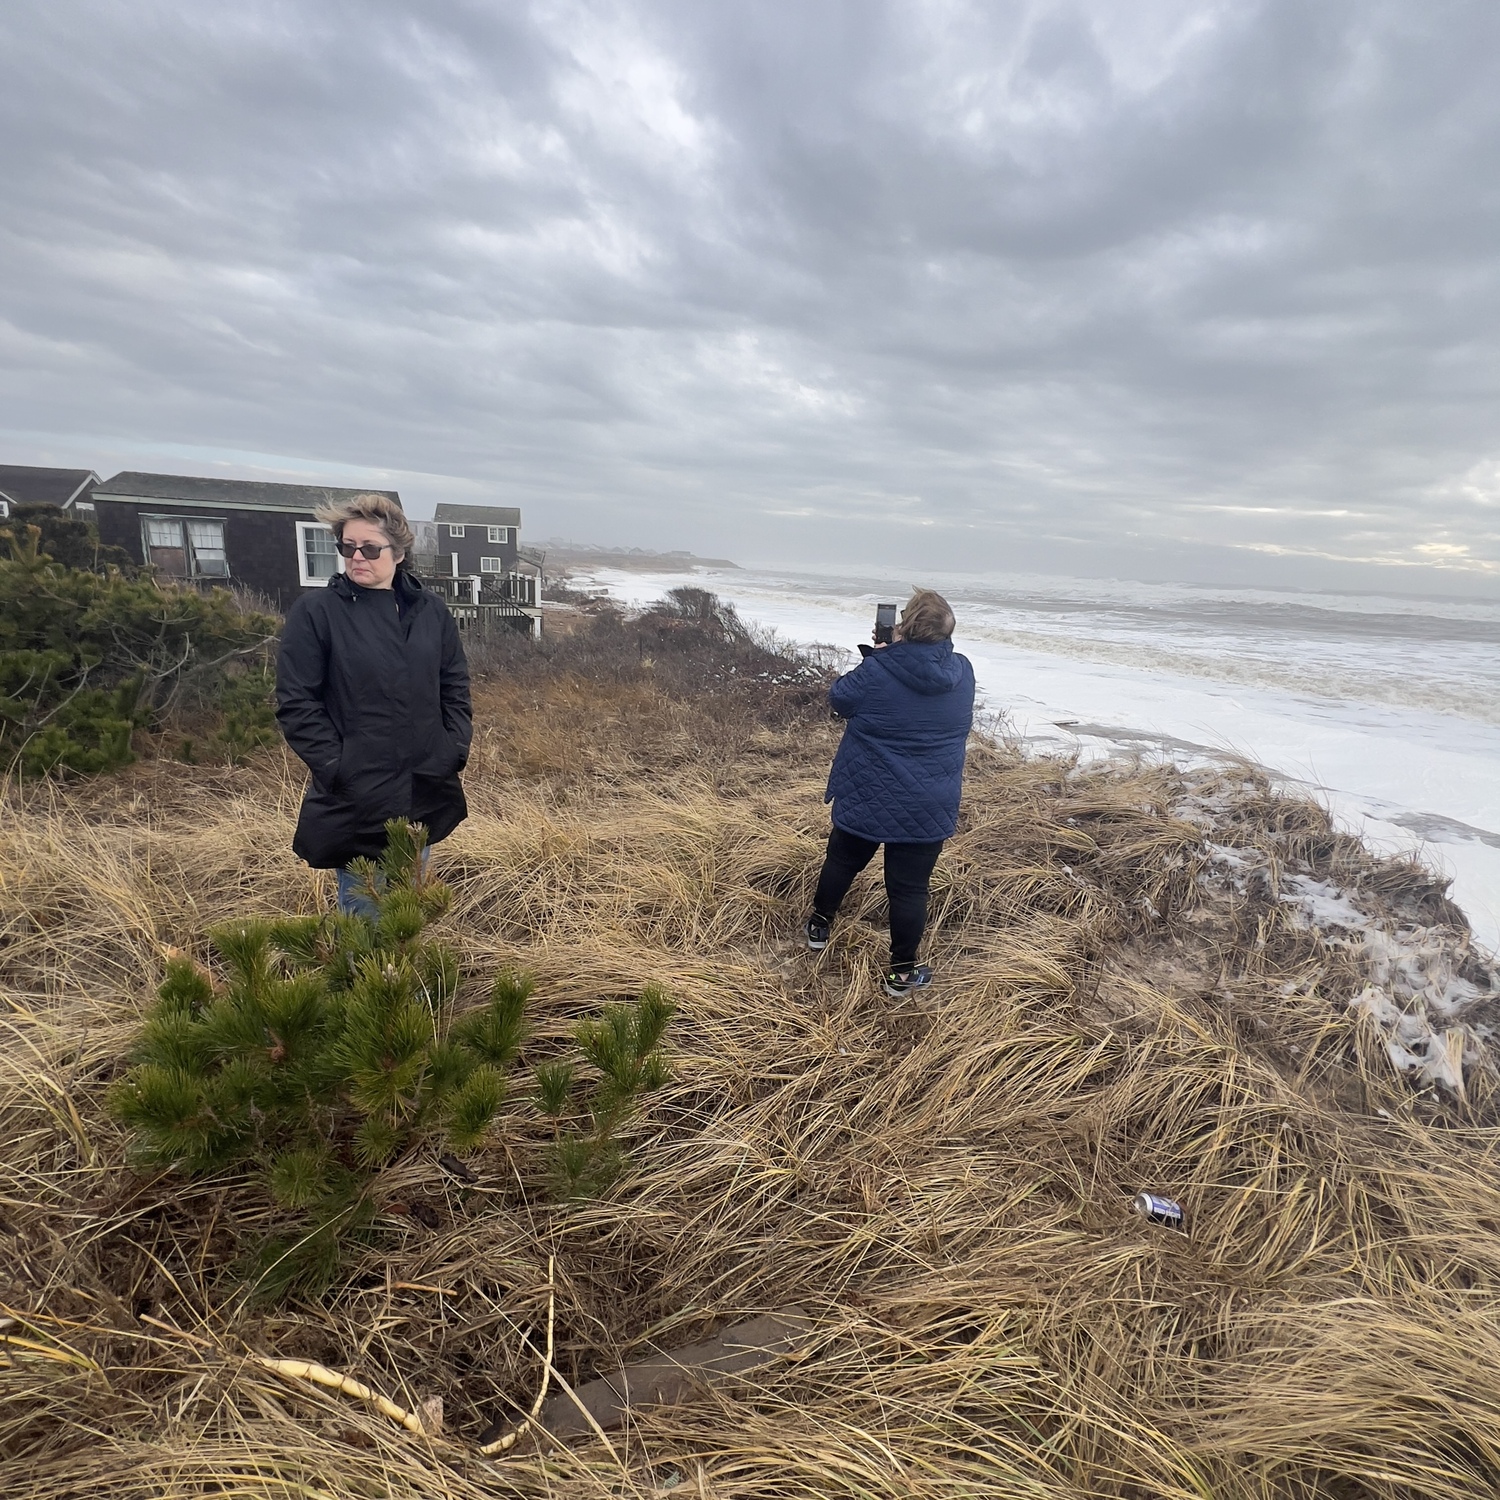 Supervisor Kathee Burke-Gonzalez and Councilwoman Cate Rogers survey the conditions at Ditch Plains during the second of three severe storms over the last month. DOUG KUNTZ